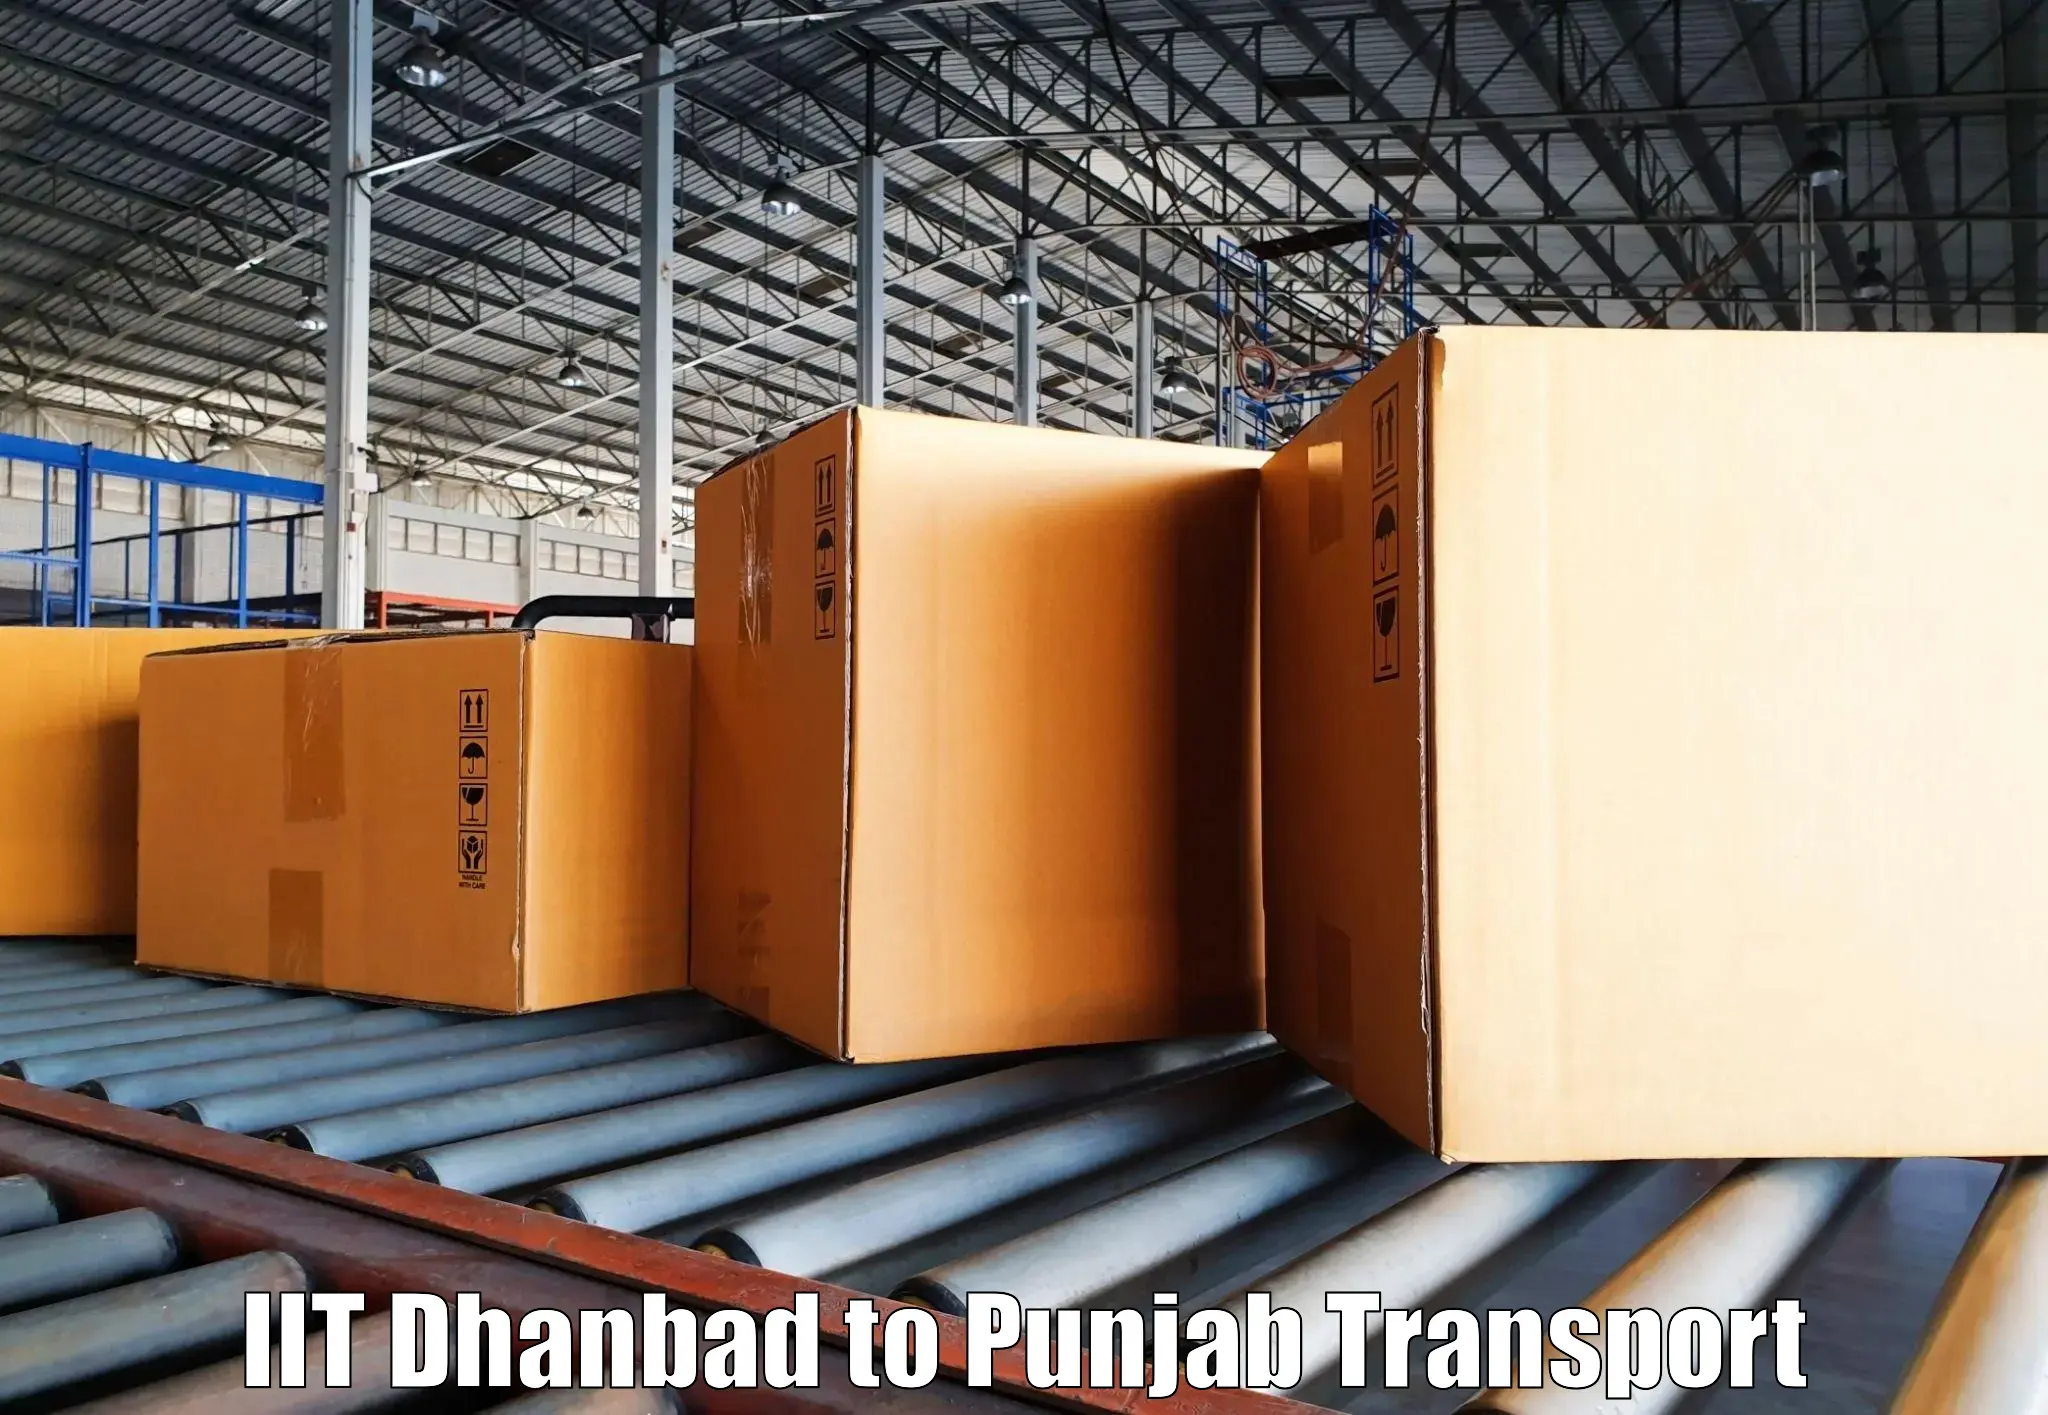 Nearby transport service IIT Dhanbad to Ludhiana